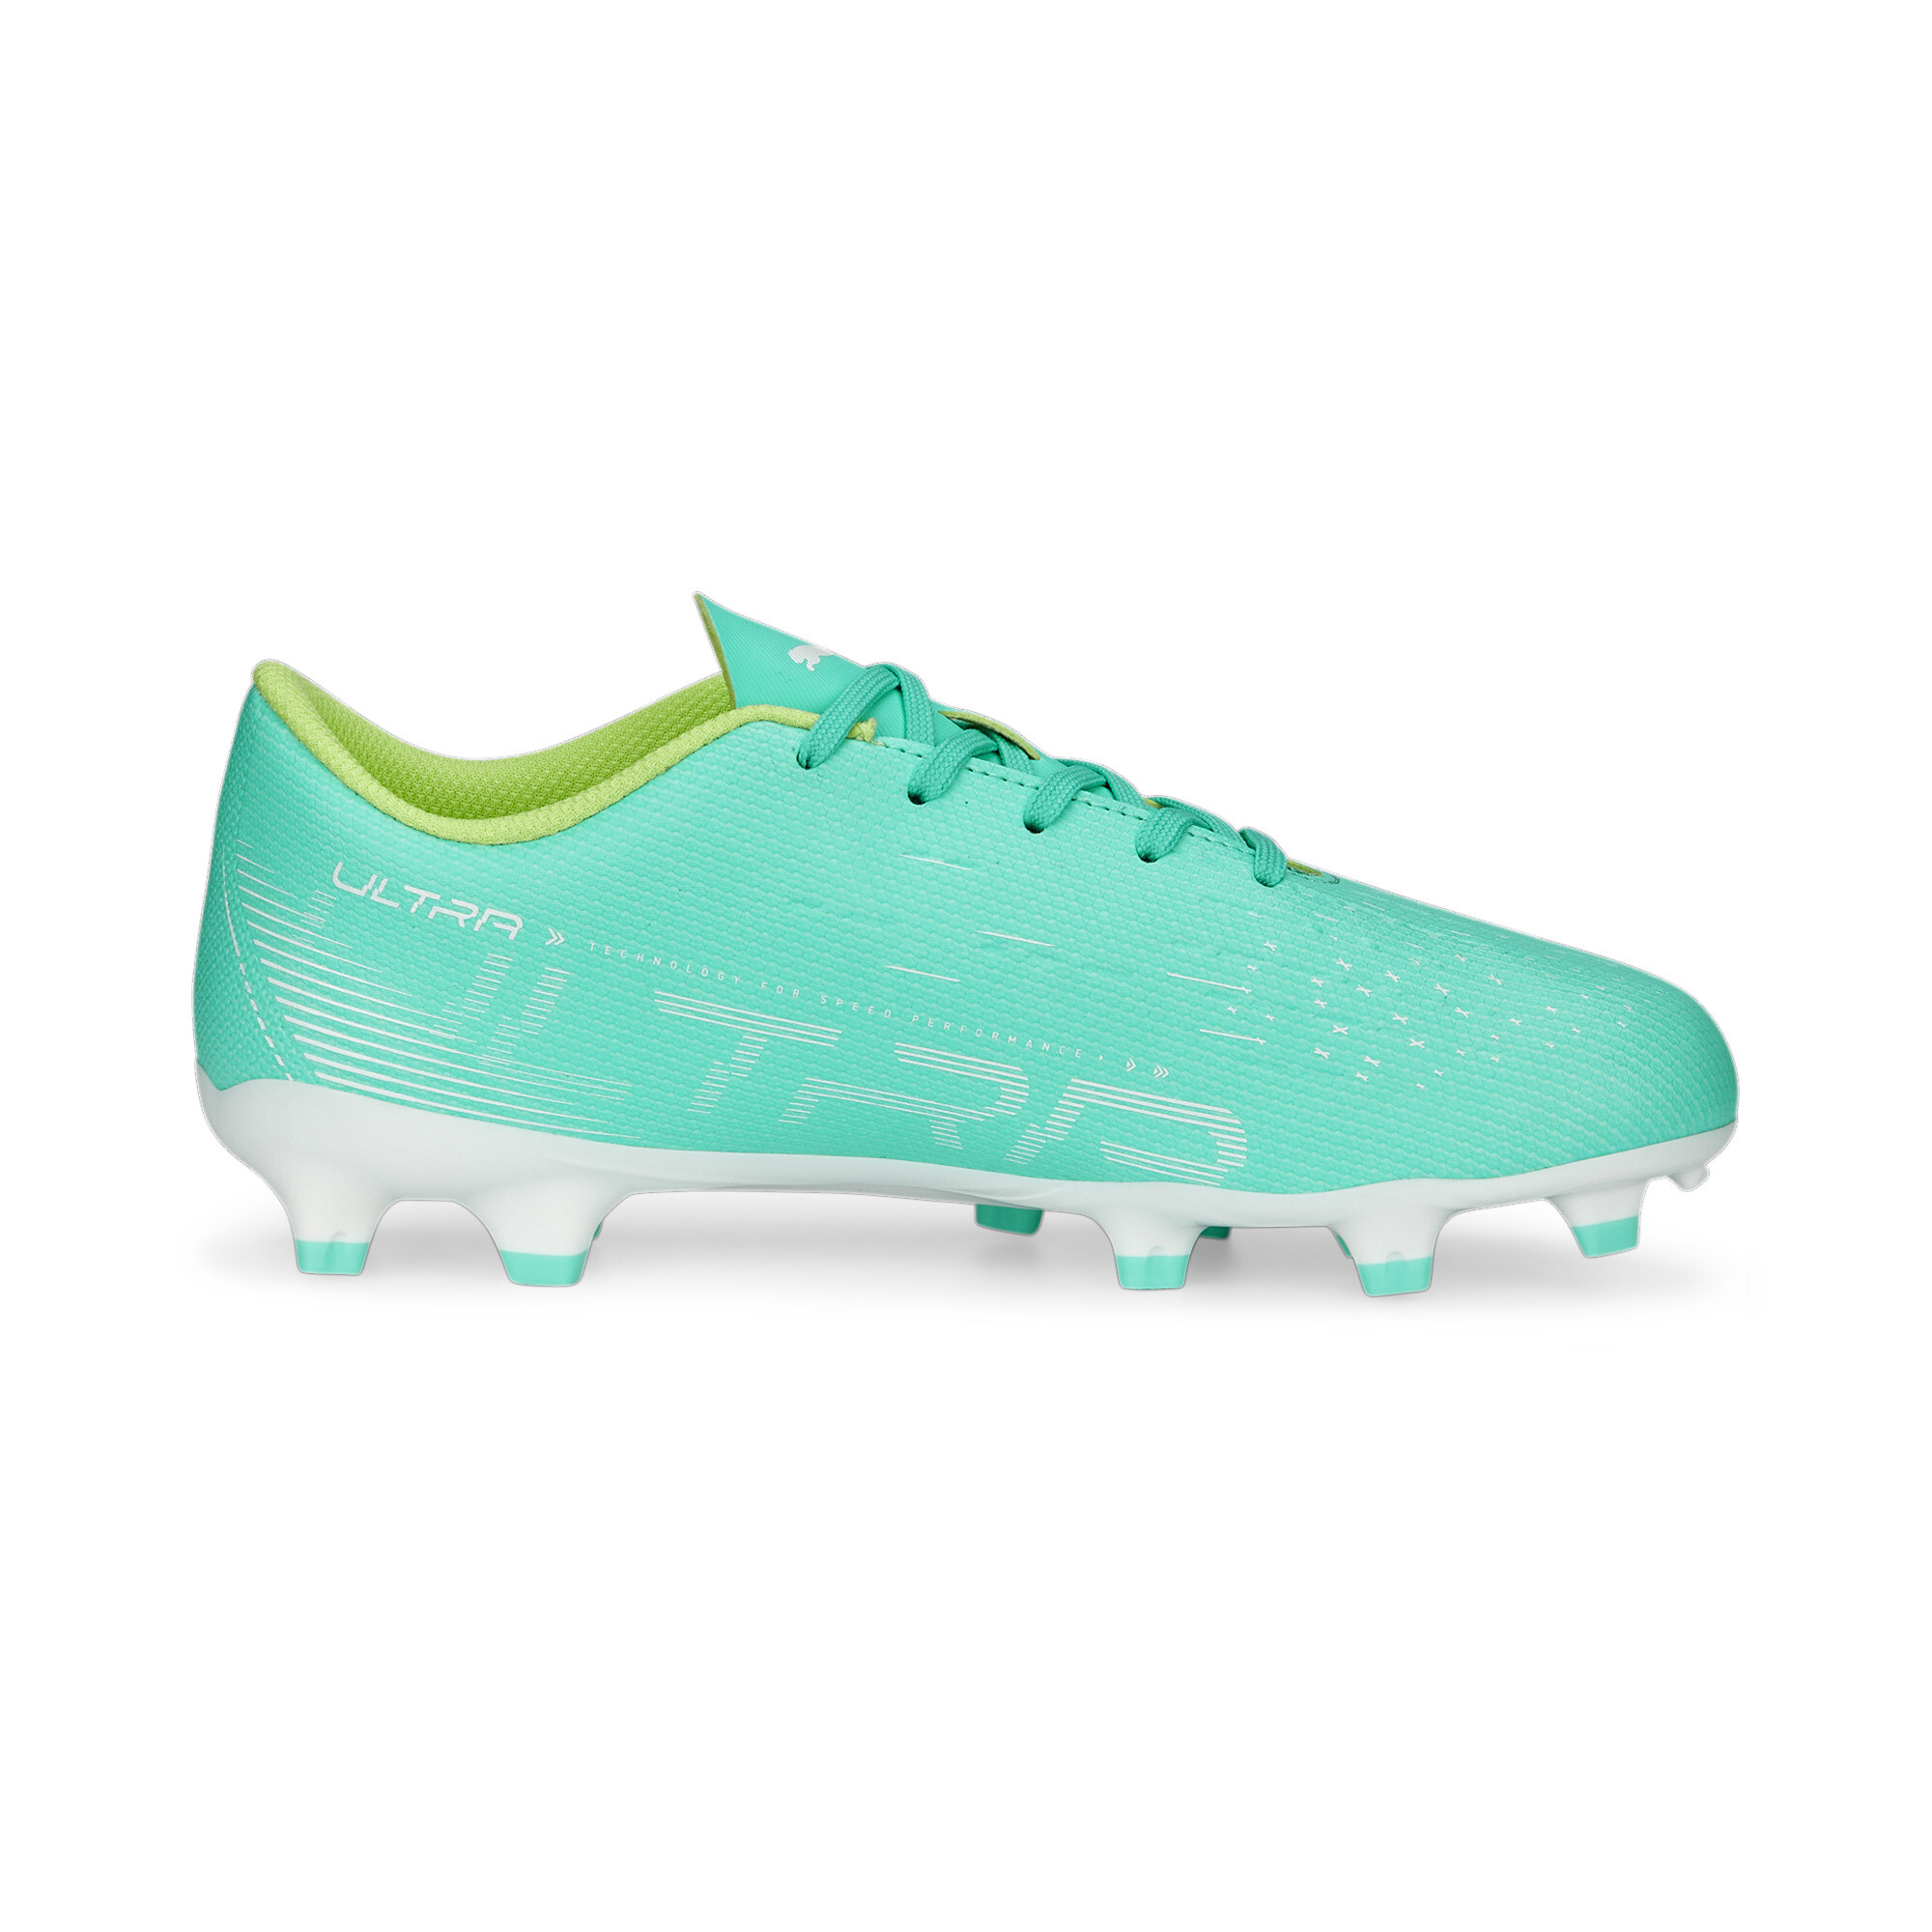 PUMA ULTRA Play FG/AG Football Boots Youth In Green, Size EU 27